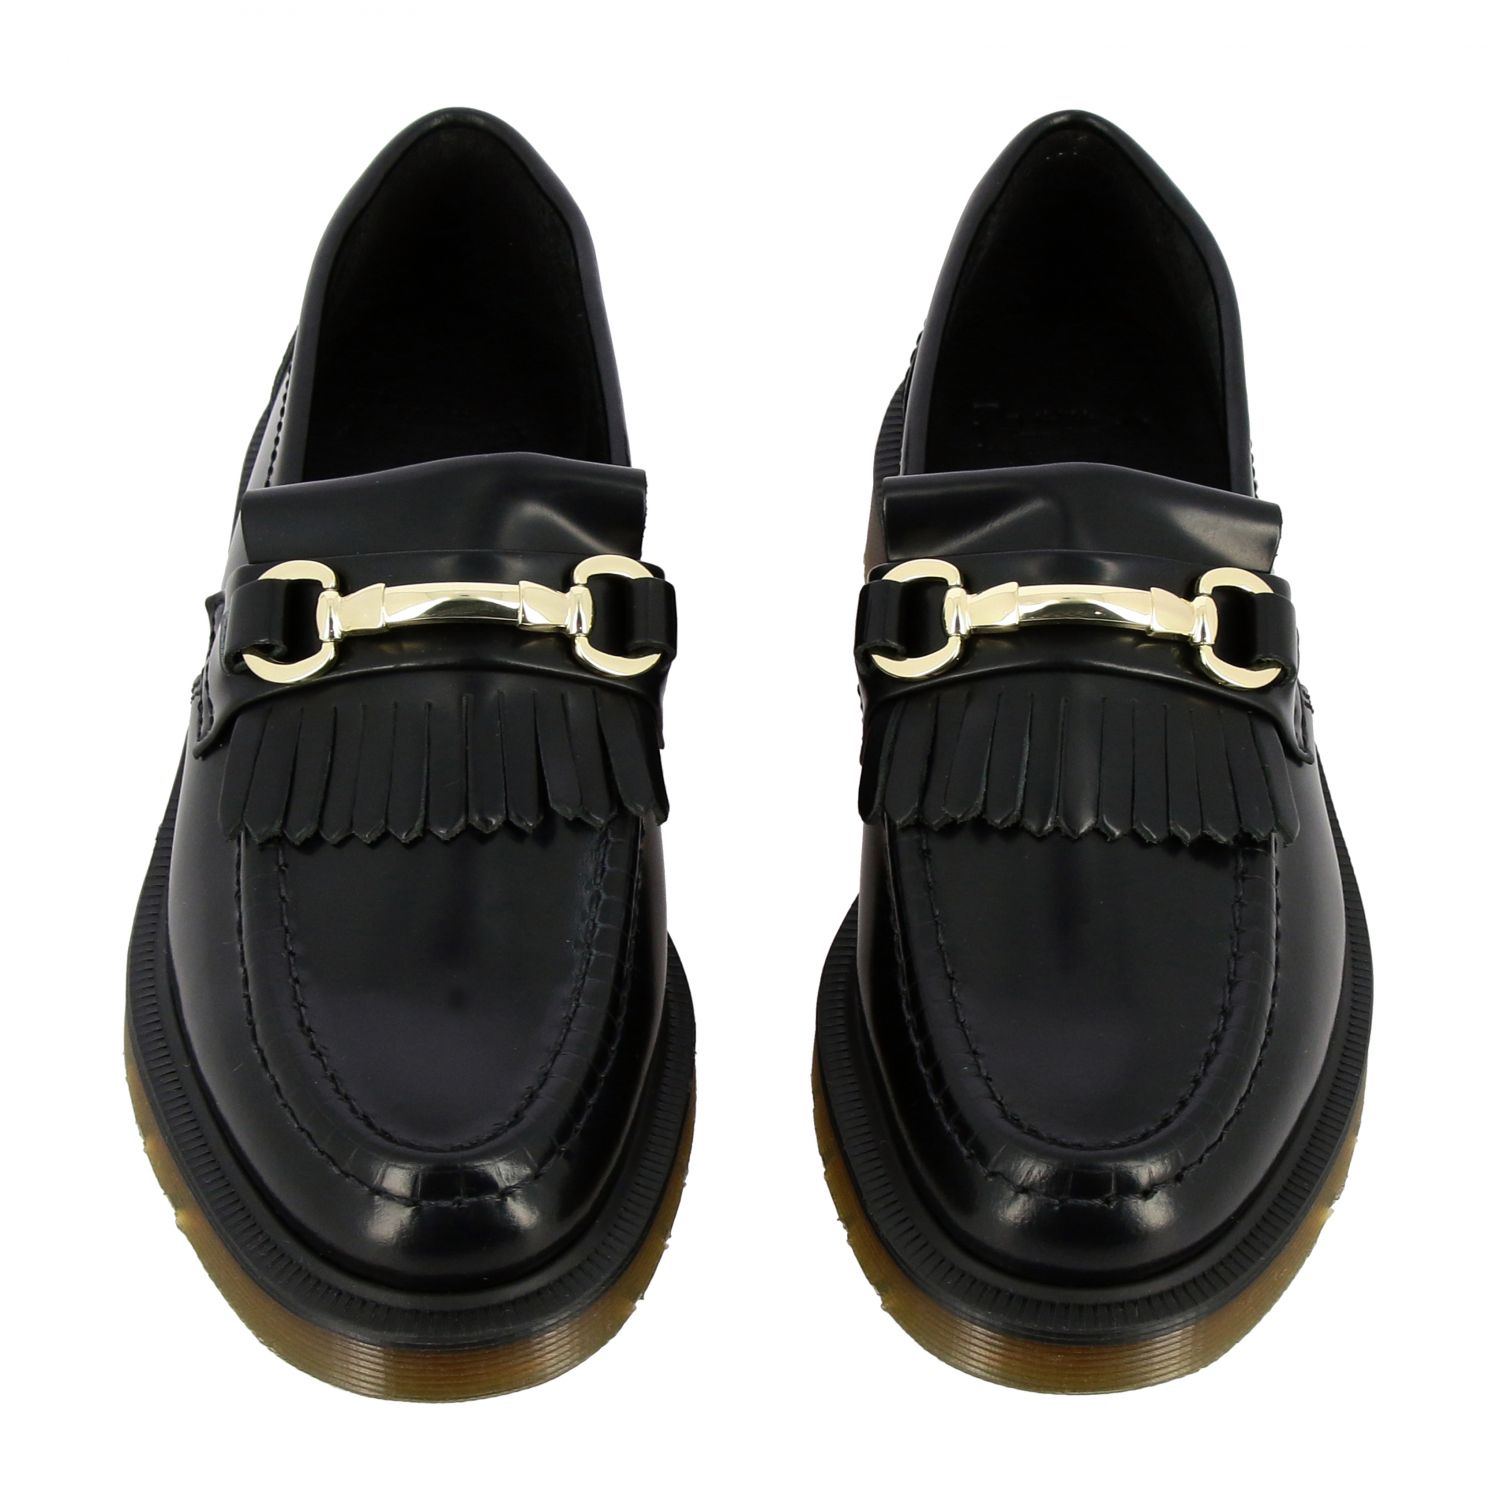 Dr Martens Loafers Womens Offers Sale, Save 68% | jlcatj.gob.mx